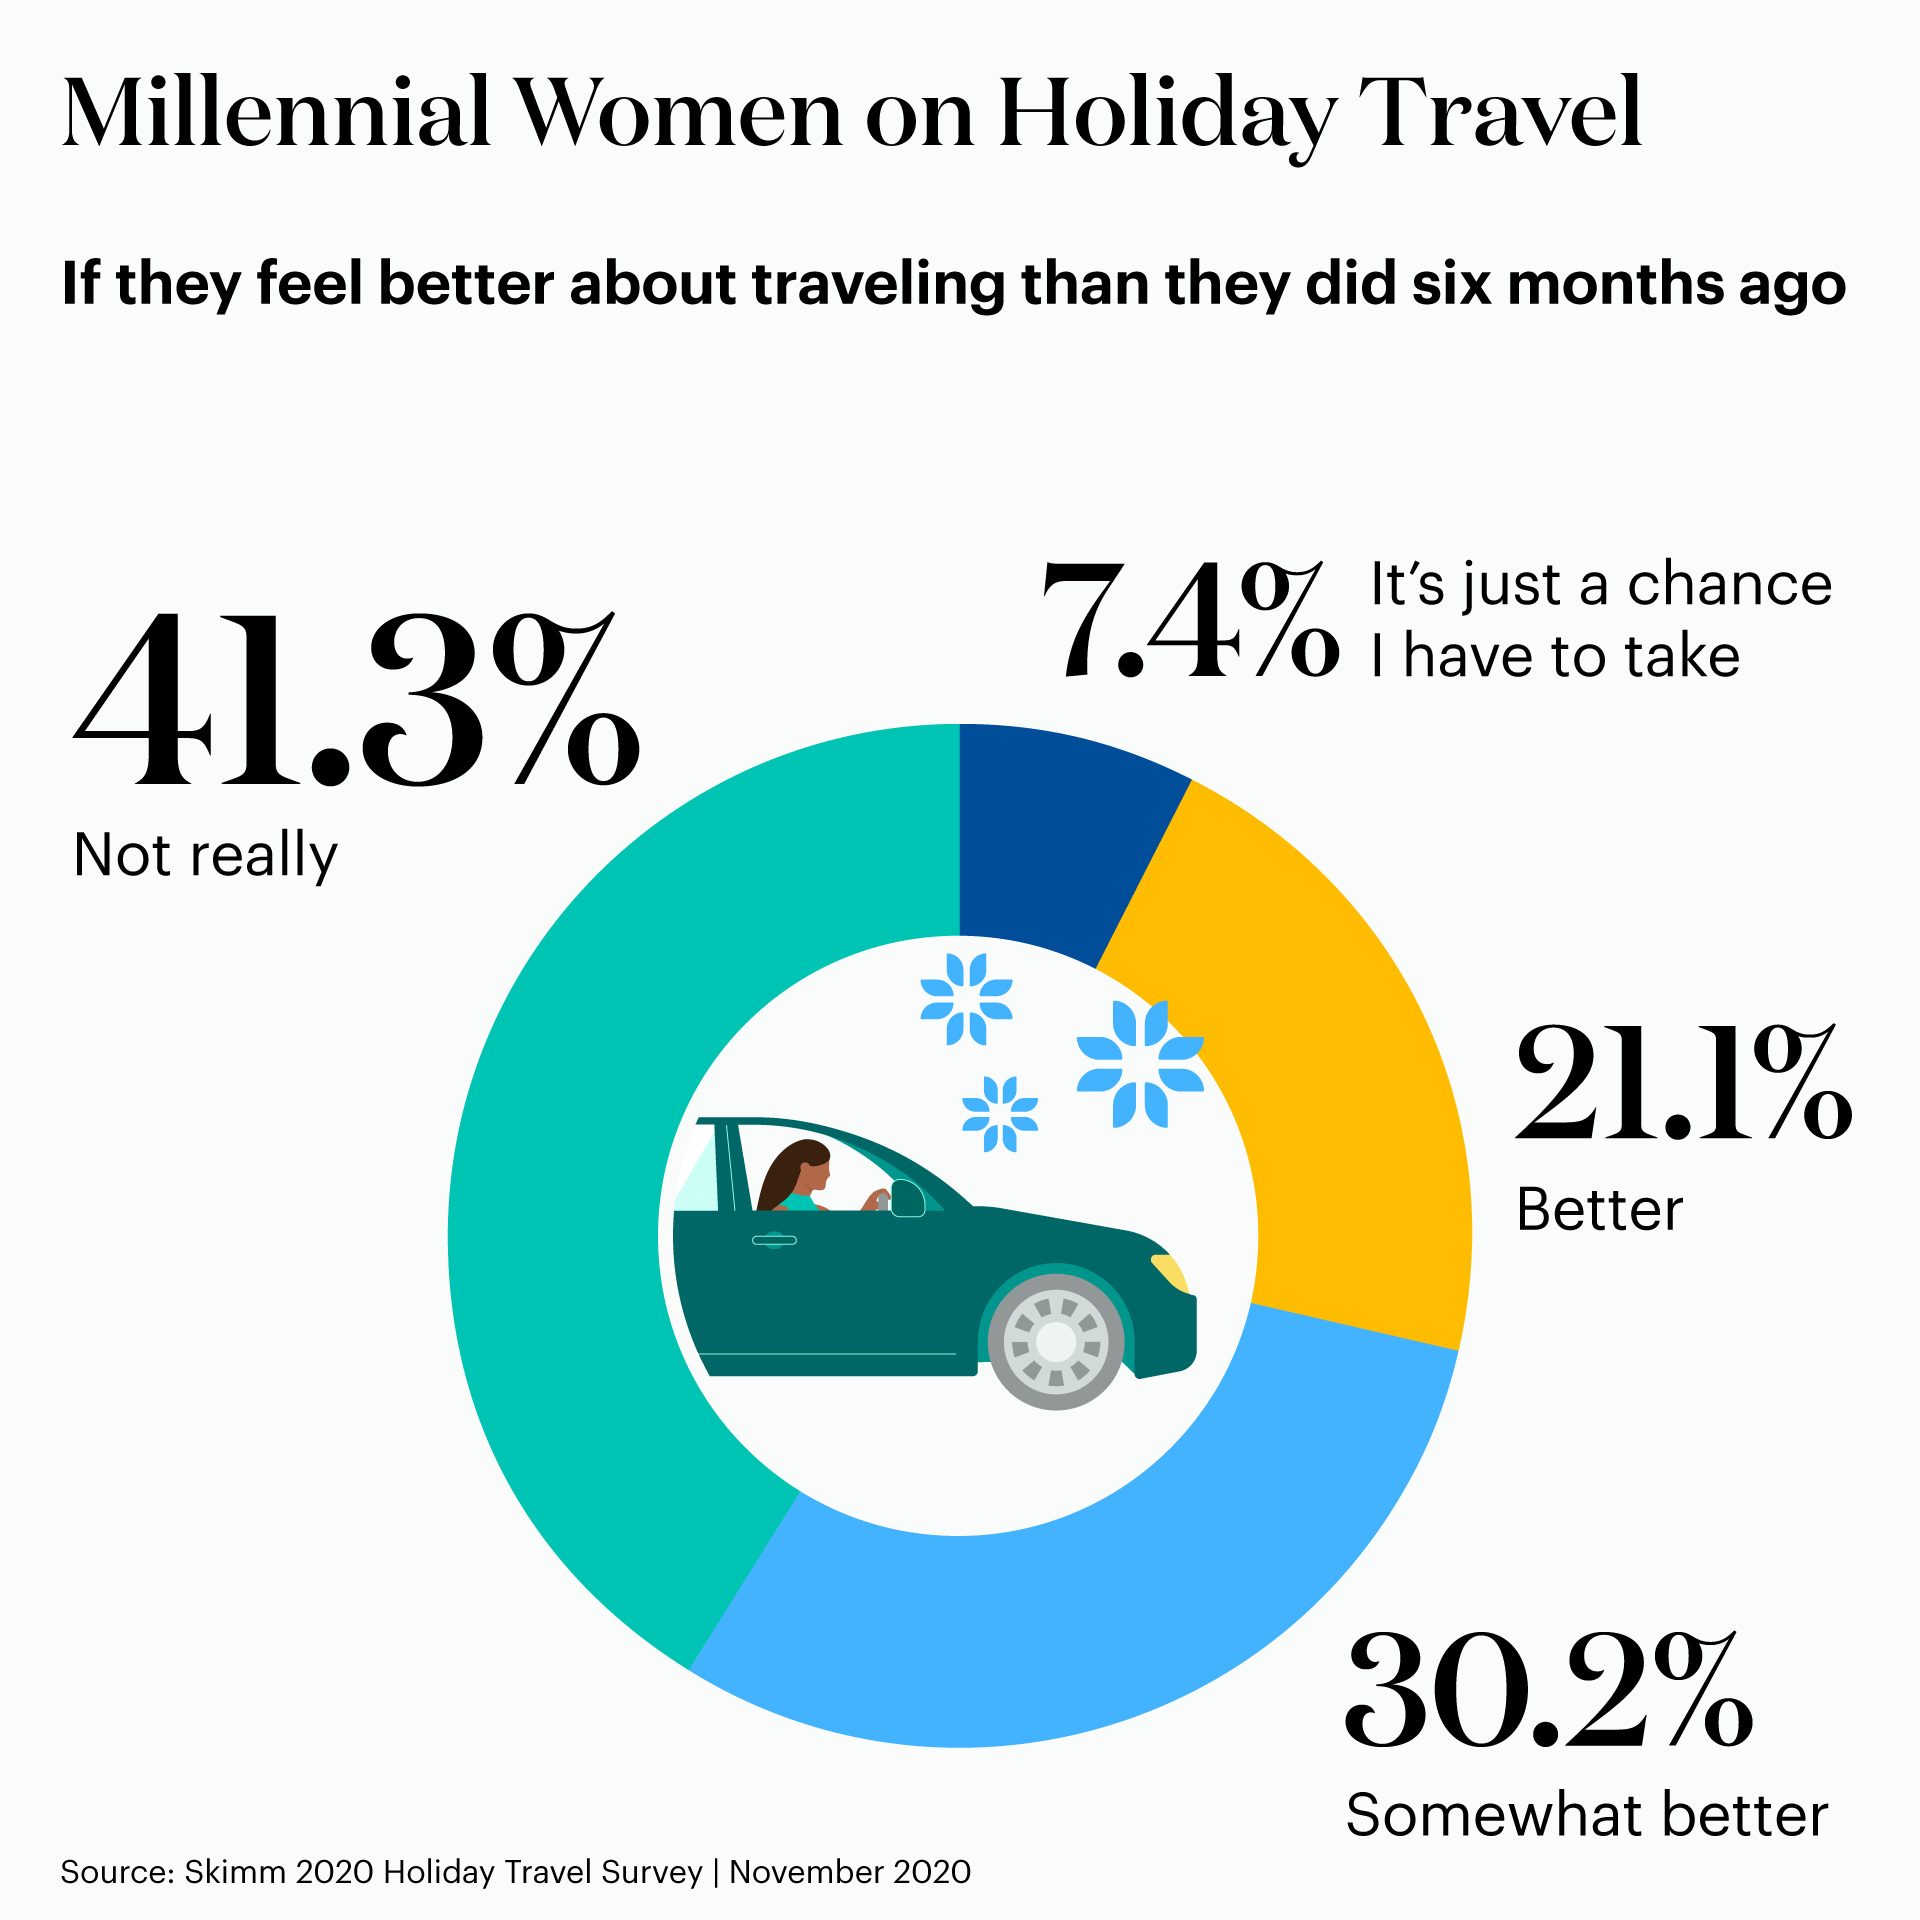 Millennial women say they don't really feel any better about traveling now than they did six months ago.